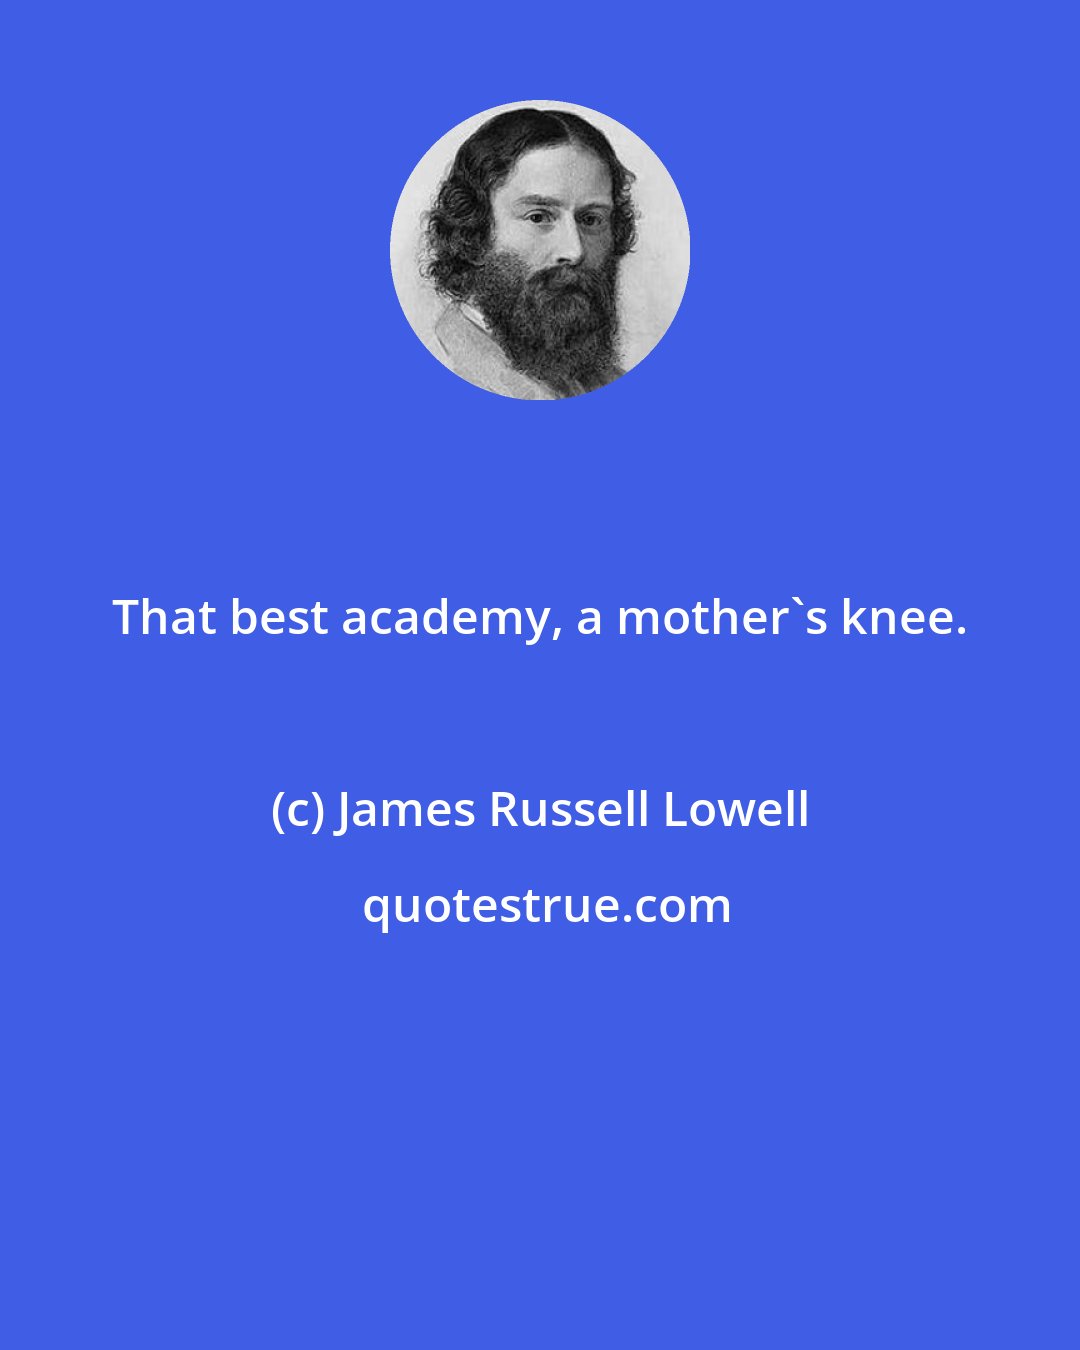 James Russell Lowell: That best academy, a mother's knee.